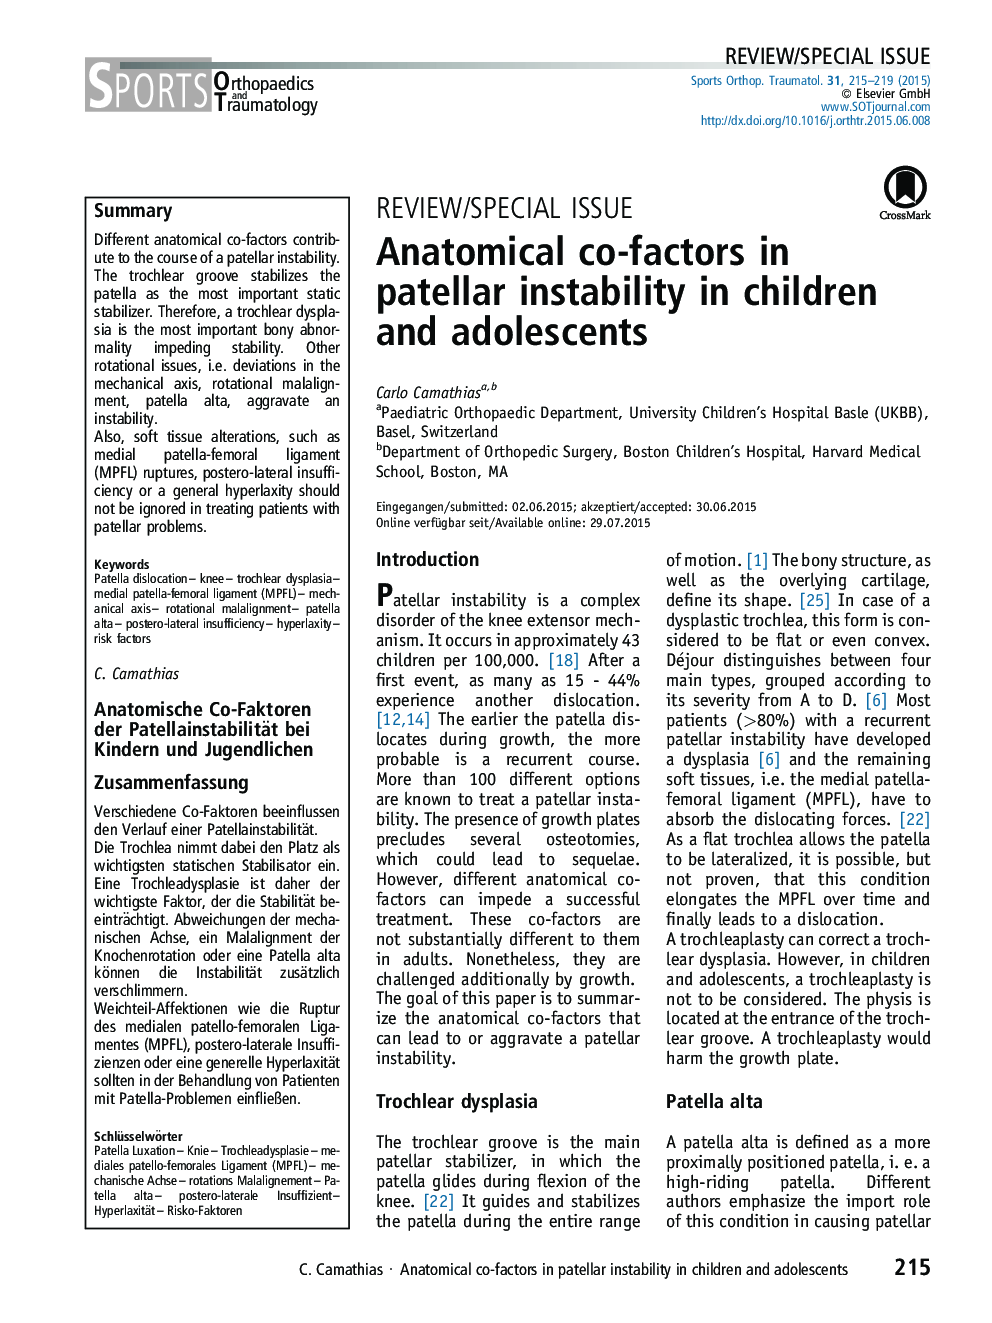 Anatomical co-factors in patellar instability in children and adolescents